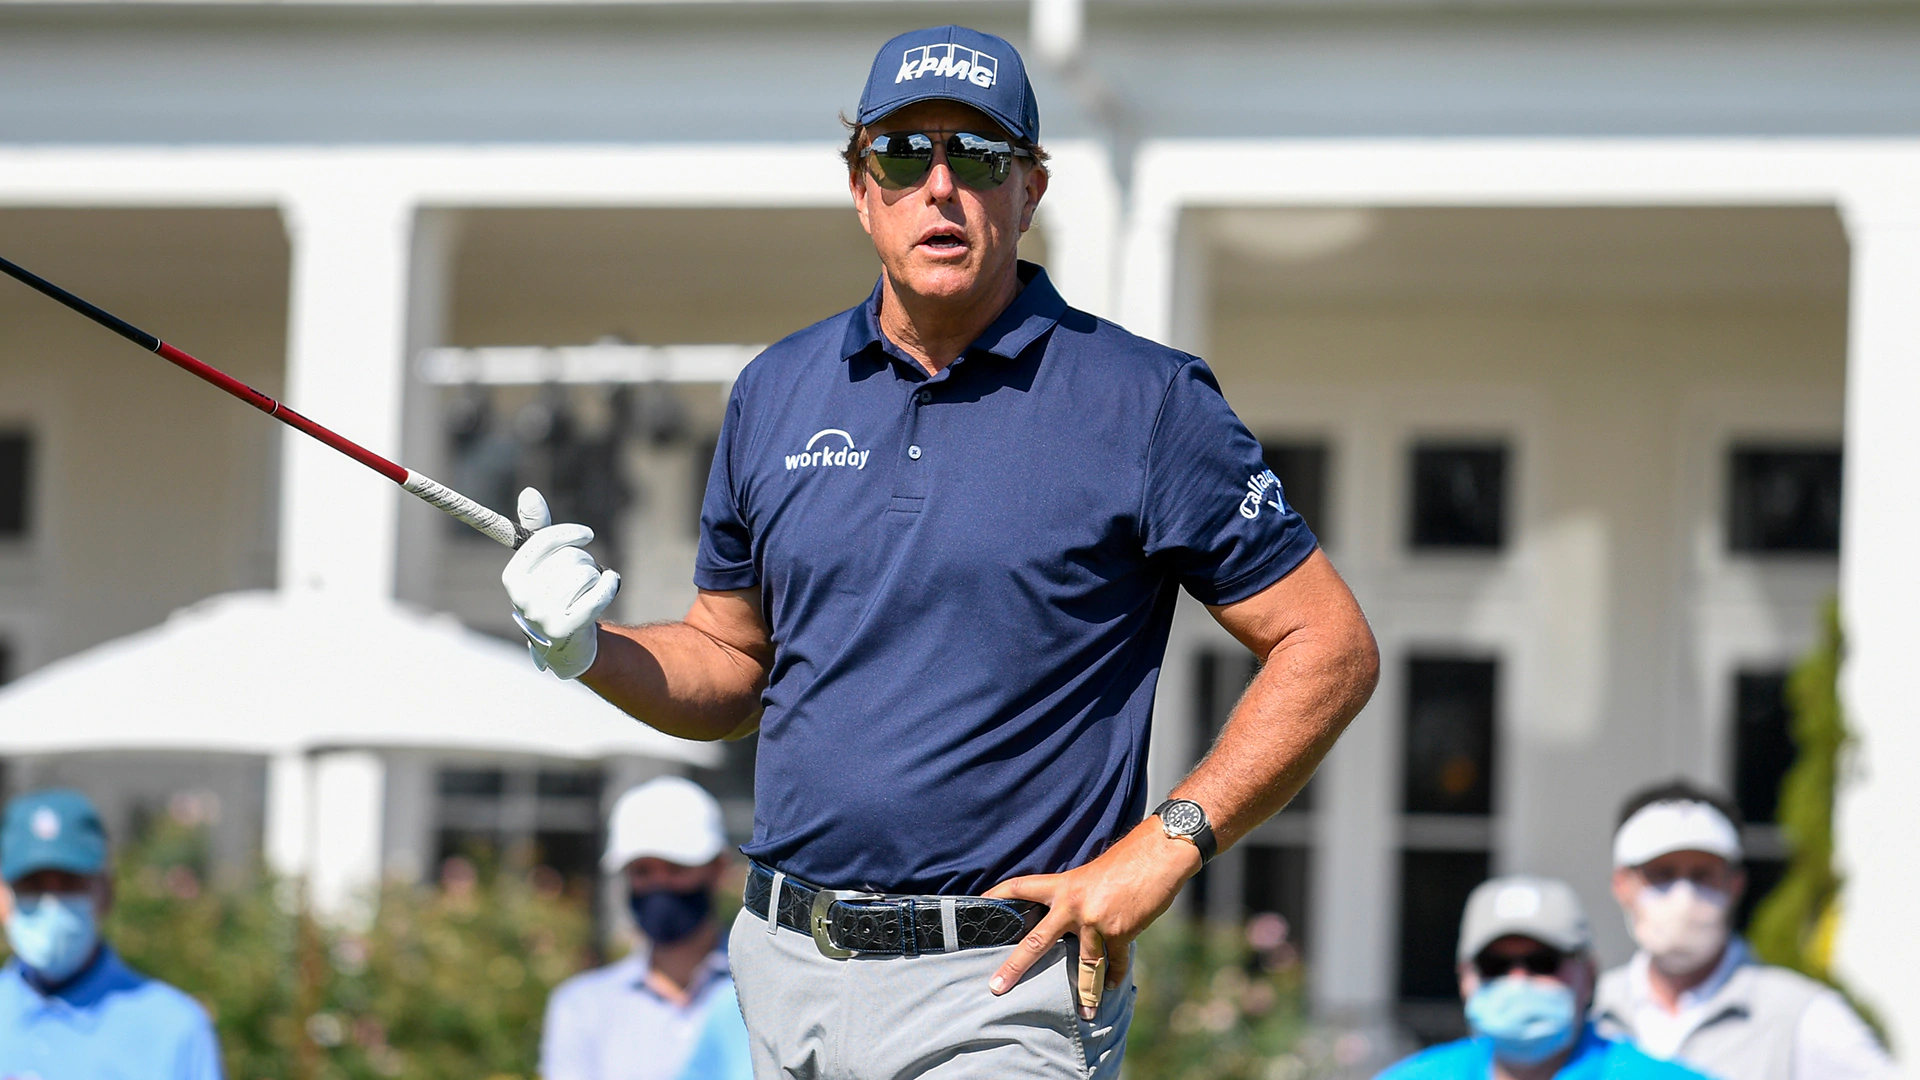 Phil Mickelson skipped Shadow Creek event to avoid ‘letdown’